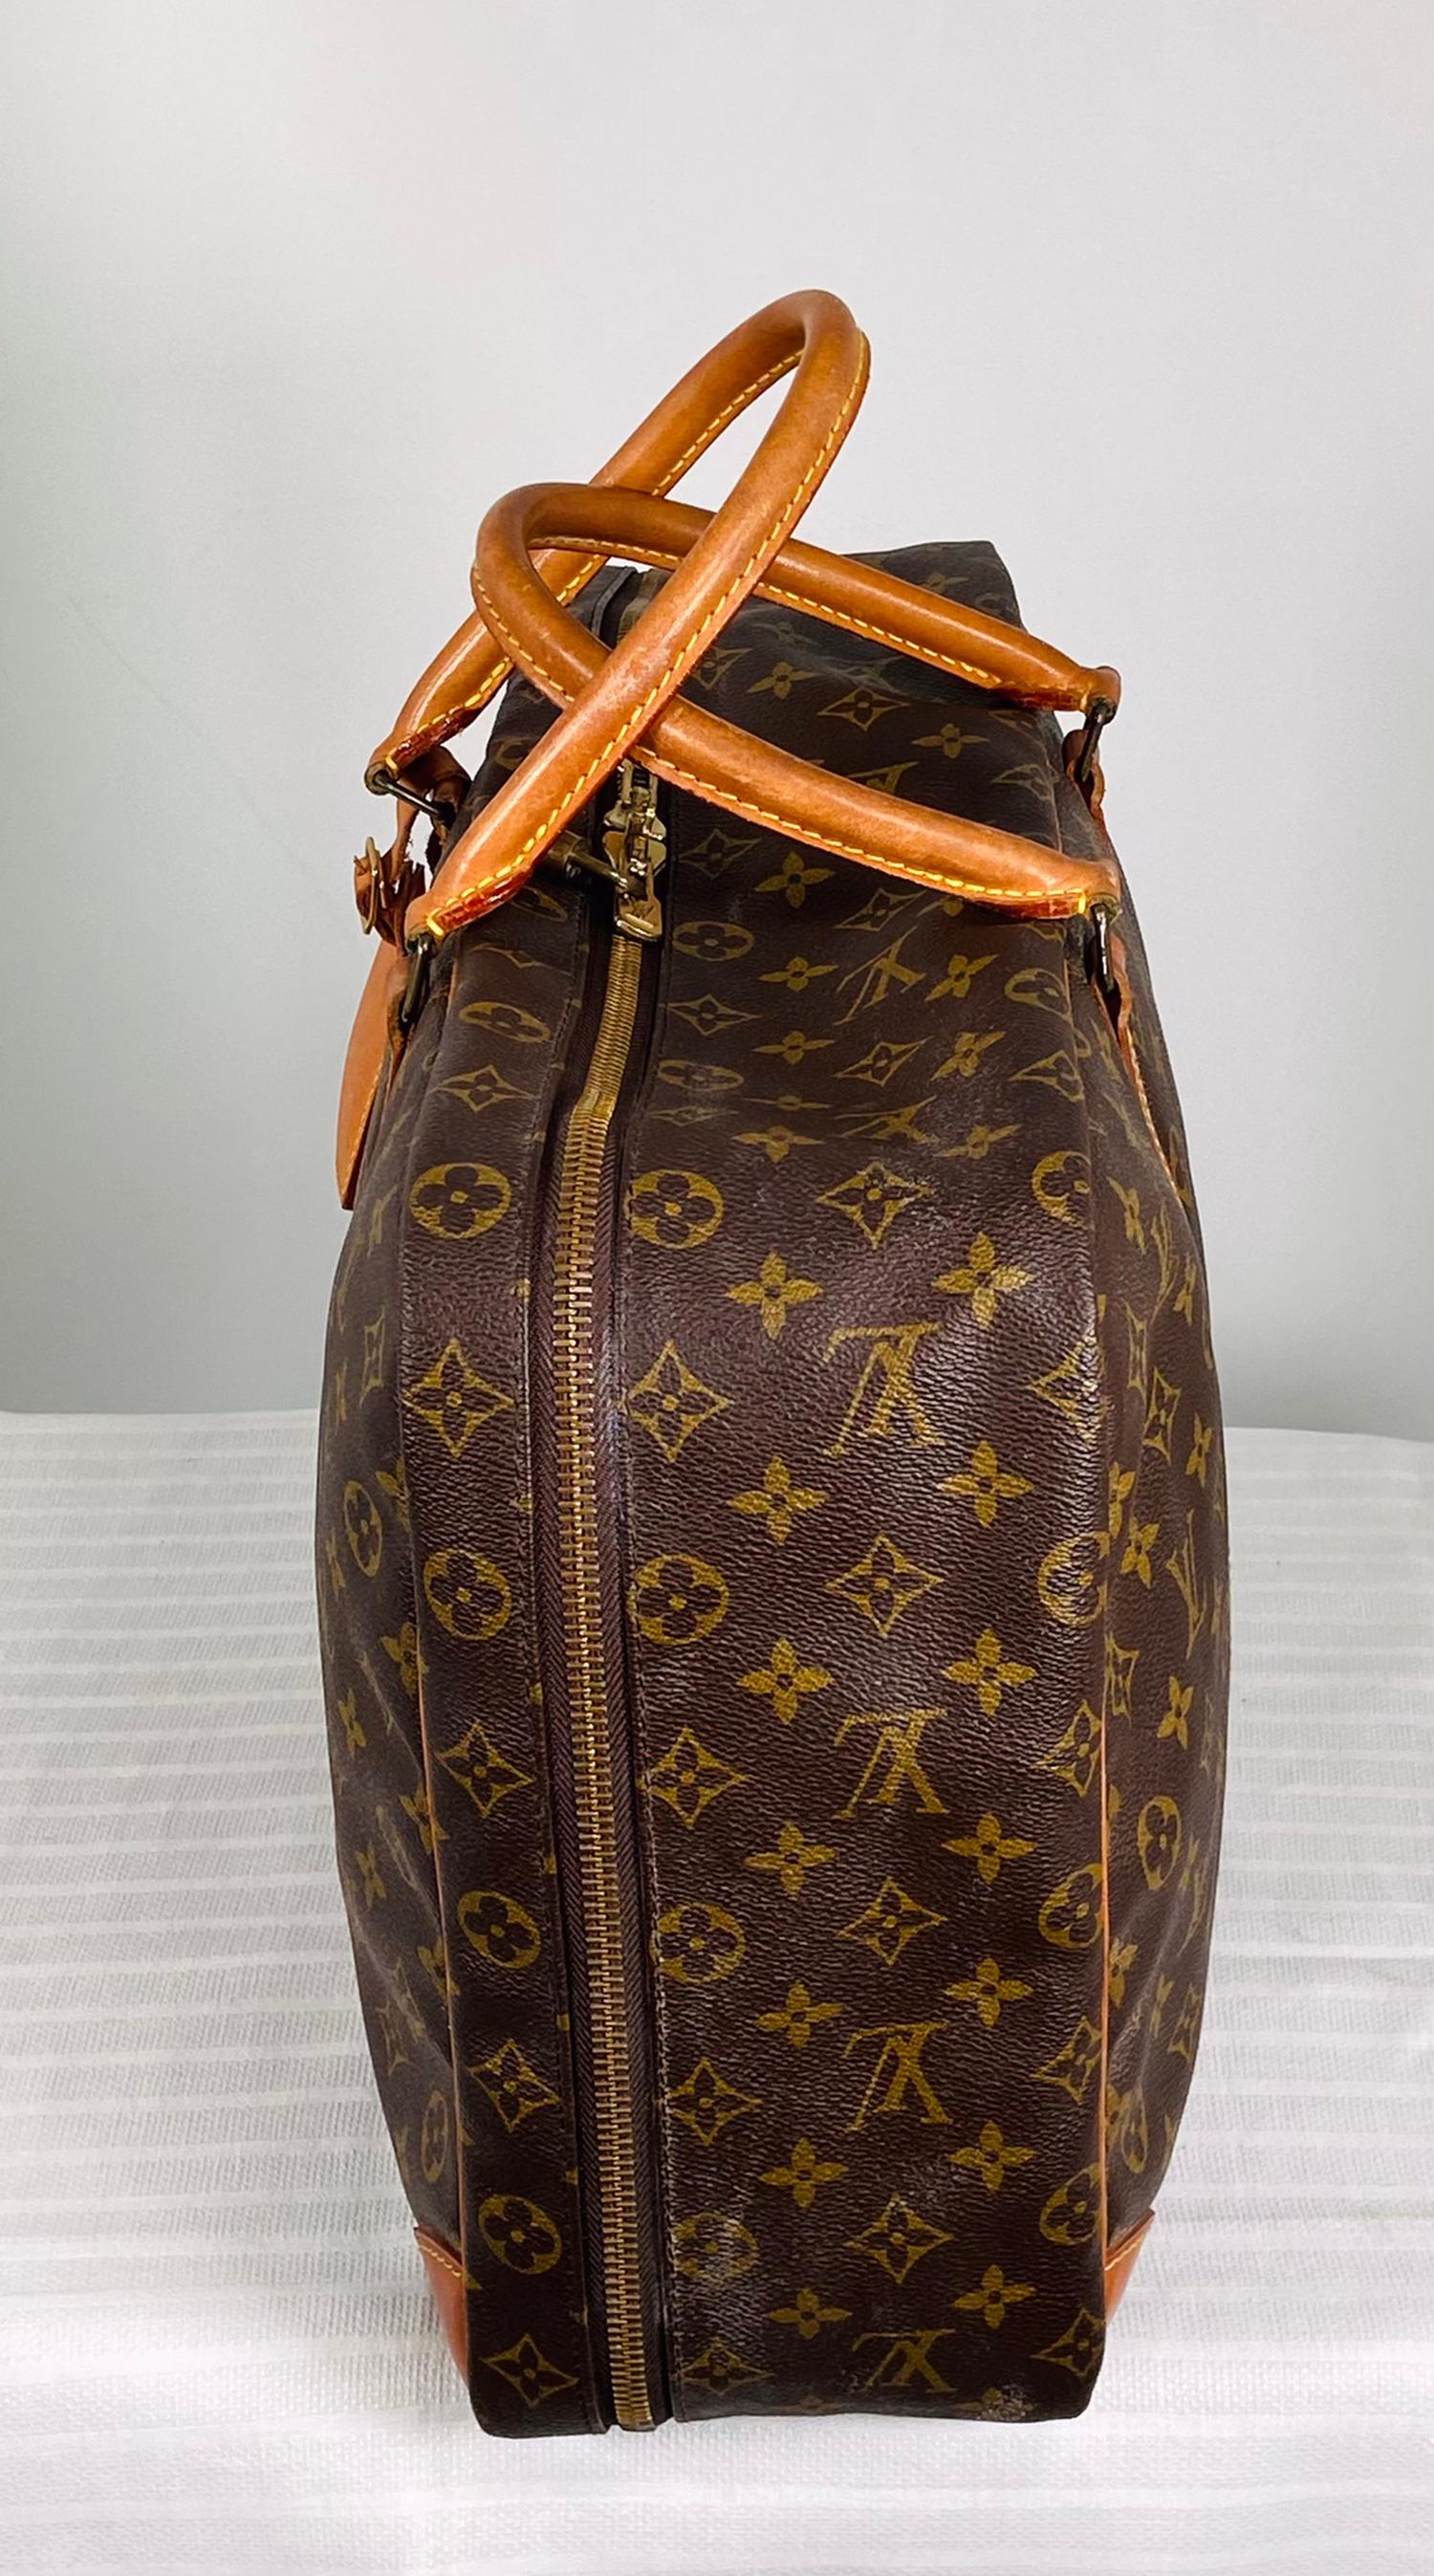 LOUIS VUITTON Sirius 45 carry on, over night, travel bag. Double handle bag has a luggage tag & LV lock but no keys. The outside is in very good pre-owned condition. The interior is clean of a leather like vinyl, with straps to hold down packed